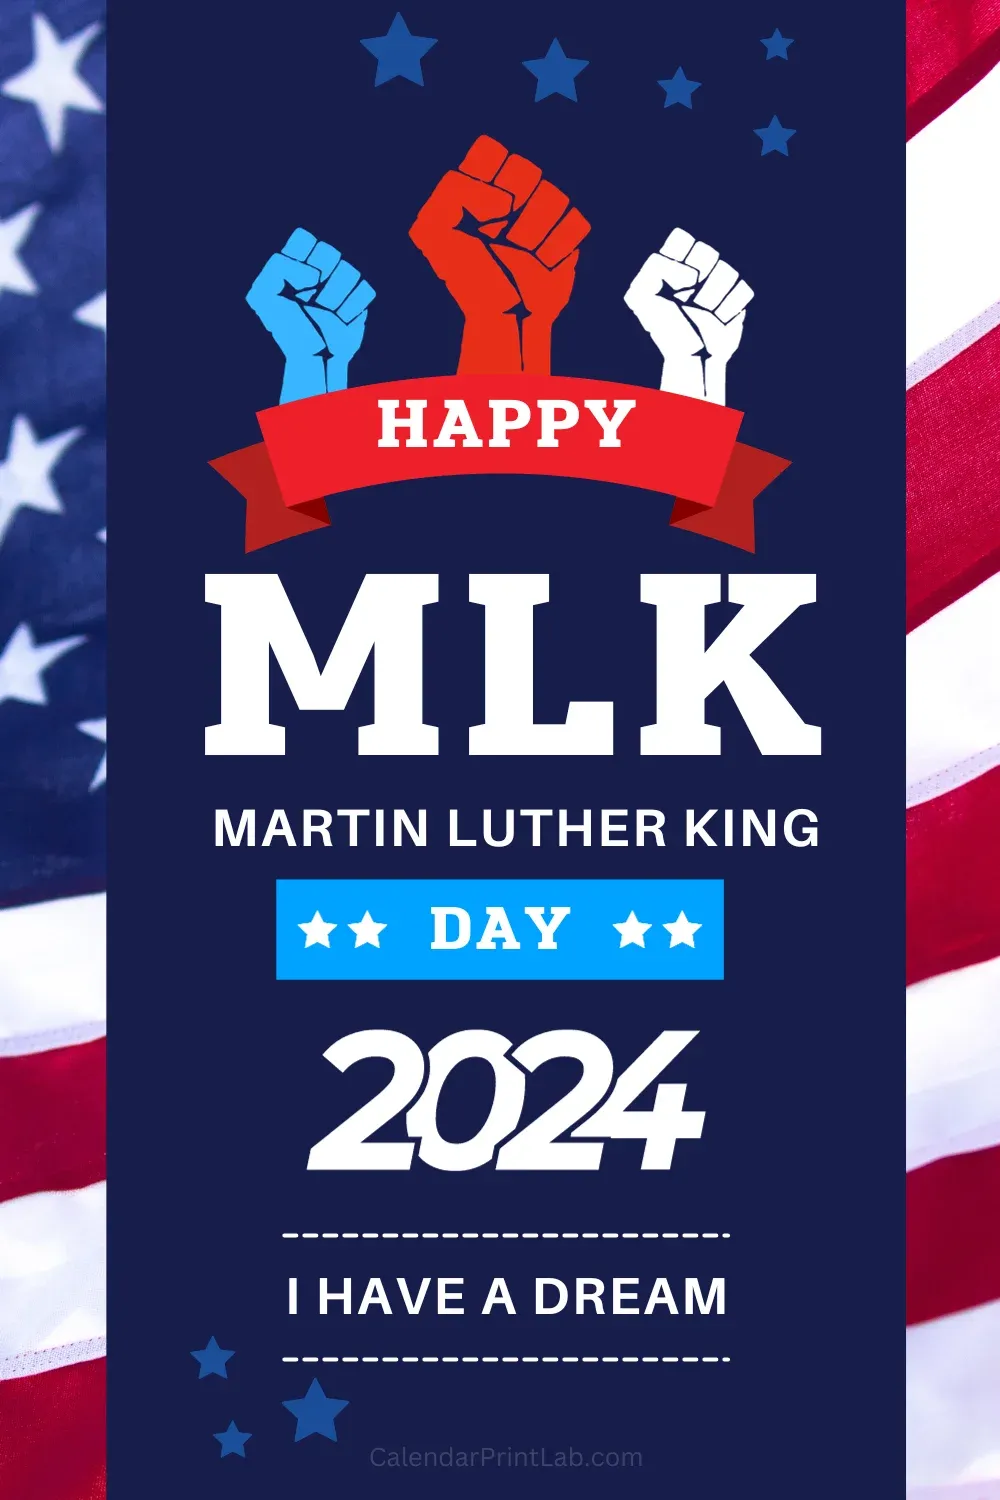 Happy Martin Luther King Day 2024 Images, Quotes, Status Updates